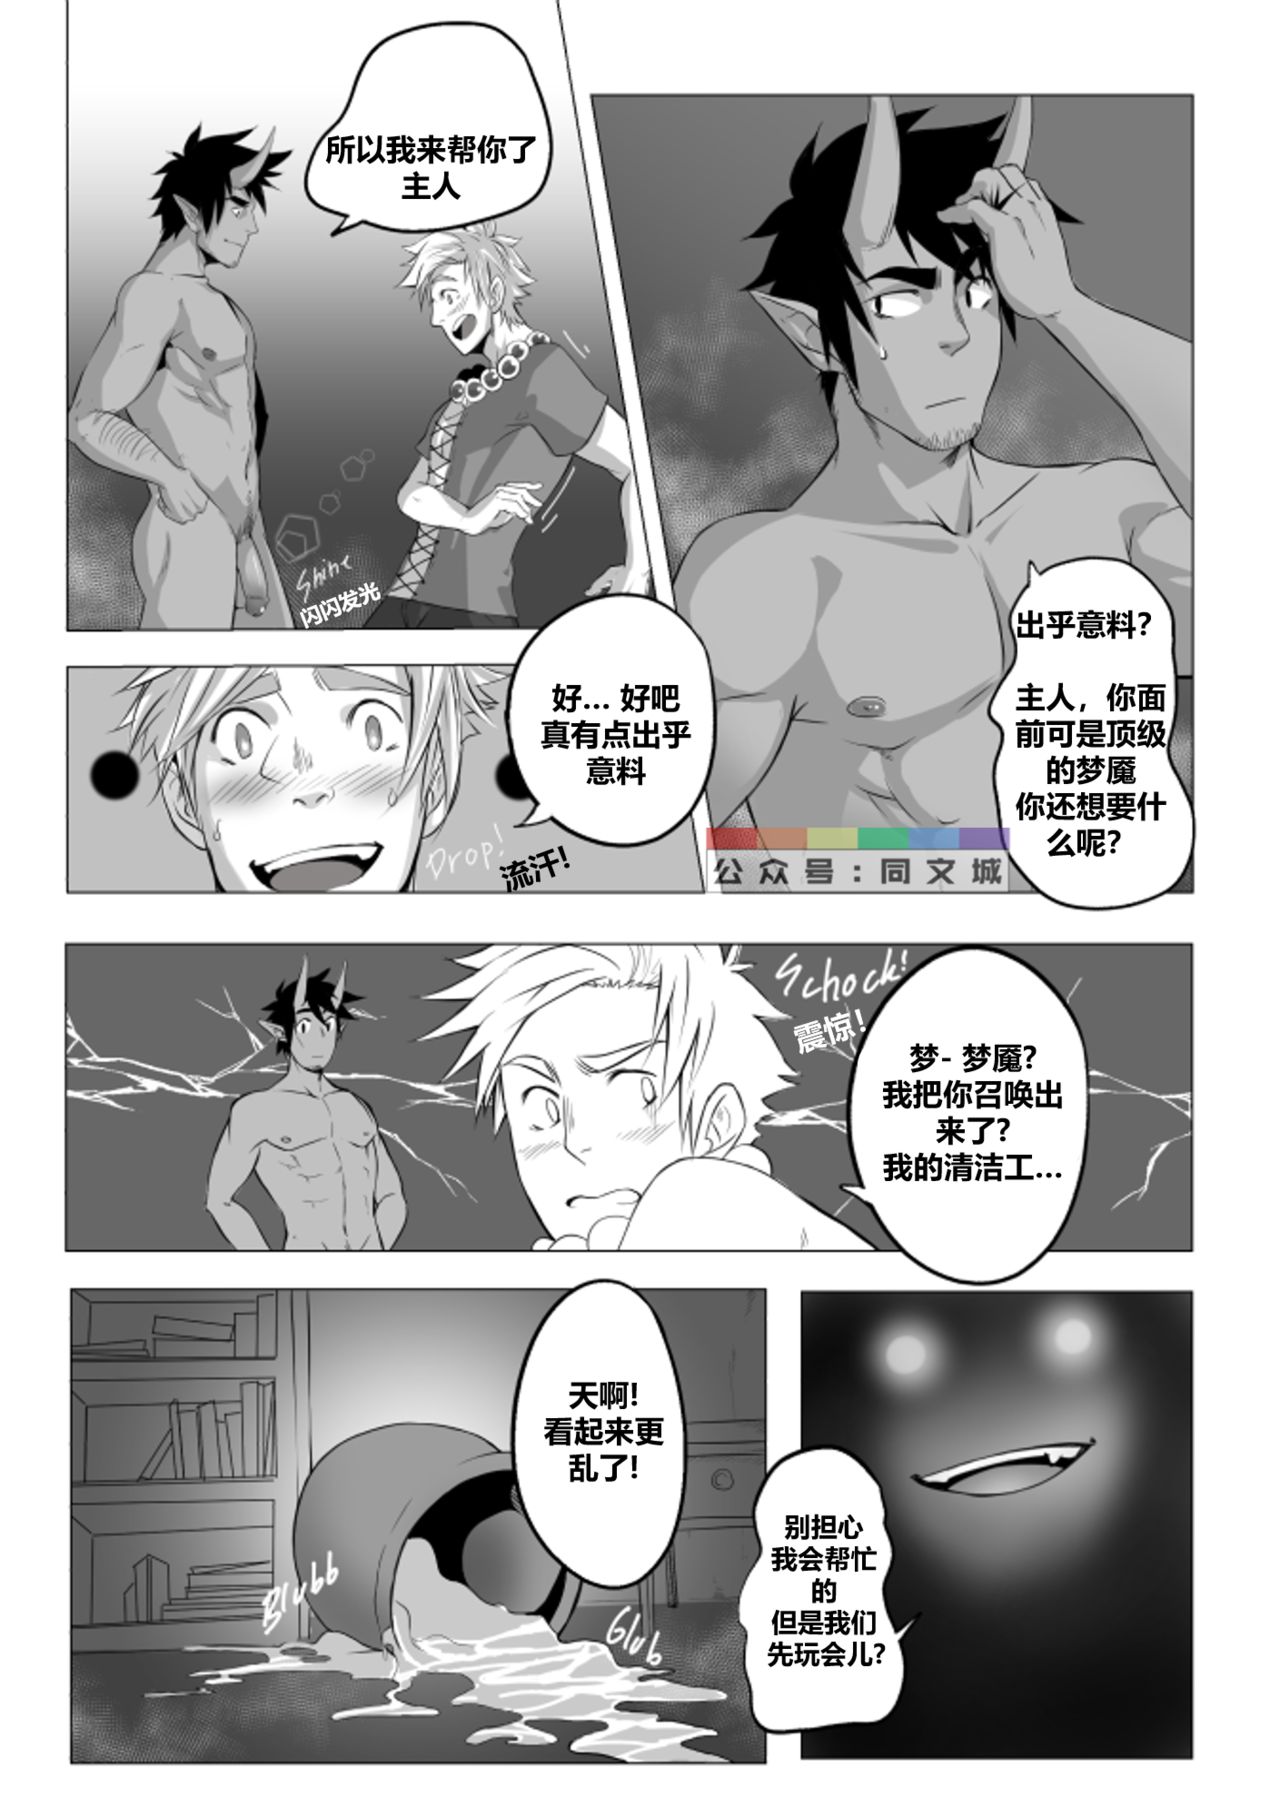 Jasdavi – Keep it Clean!（Chinese） page 7 full